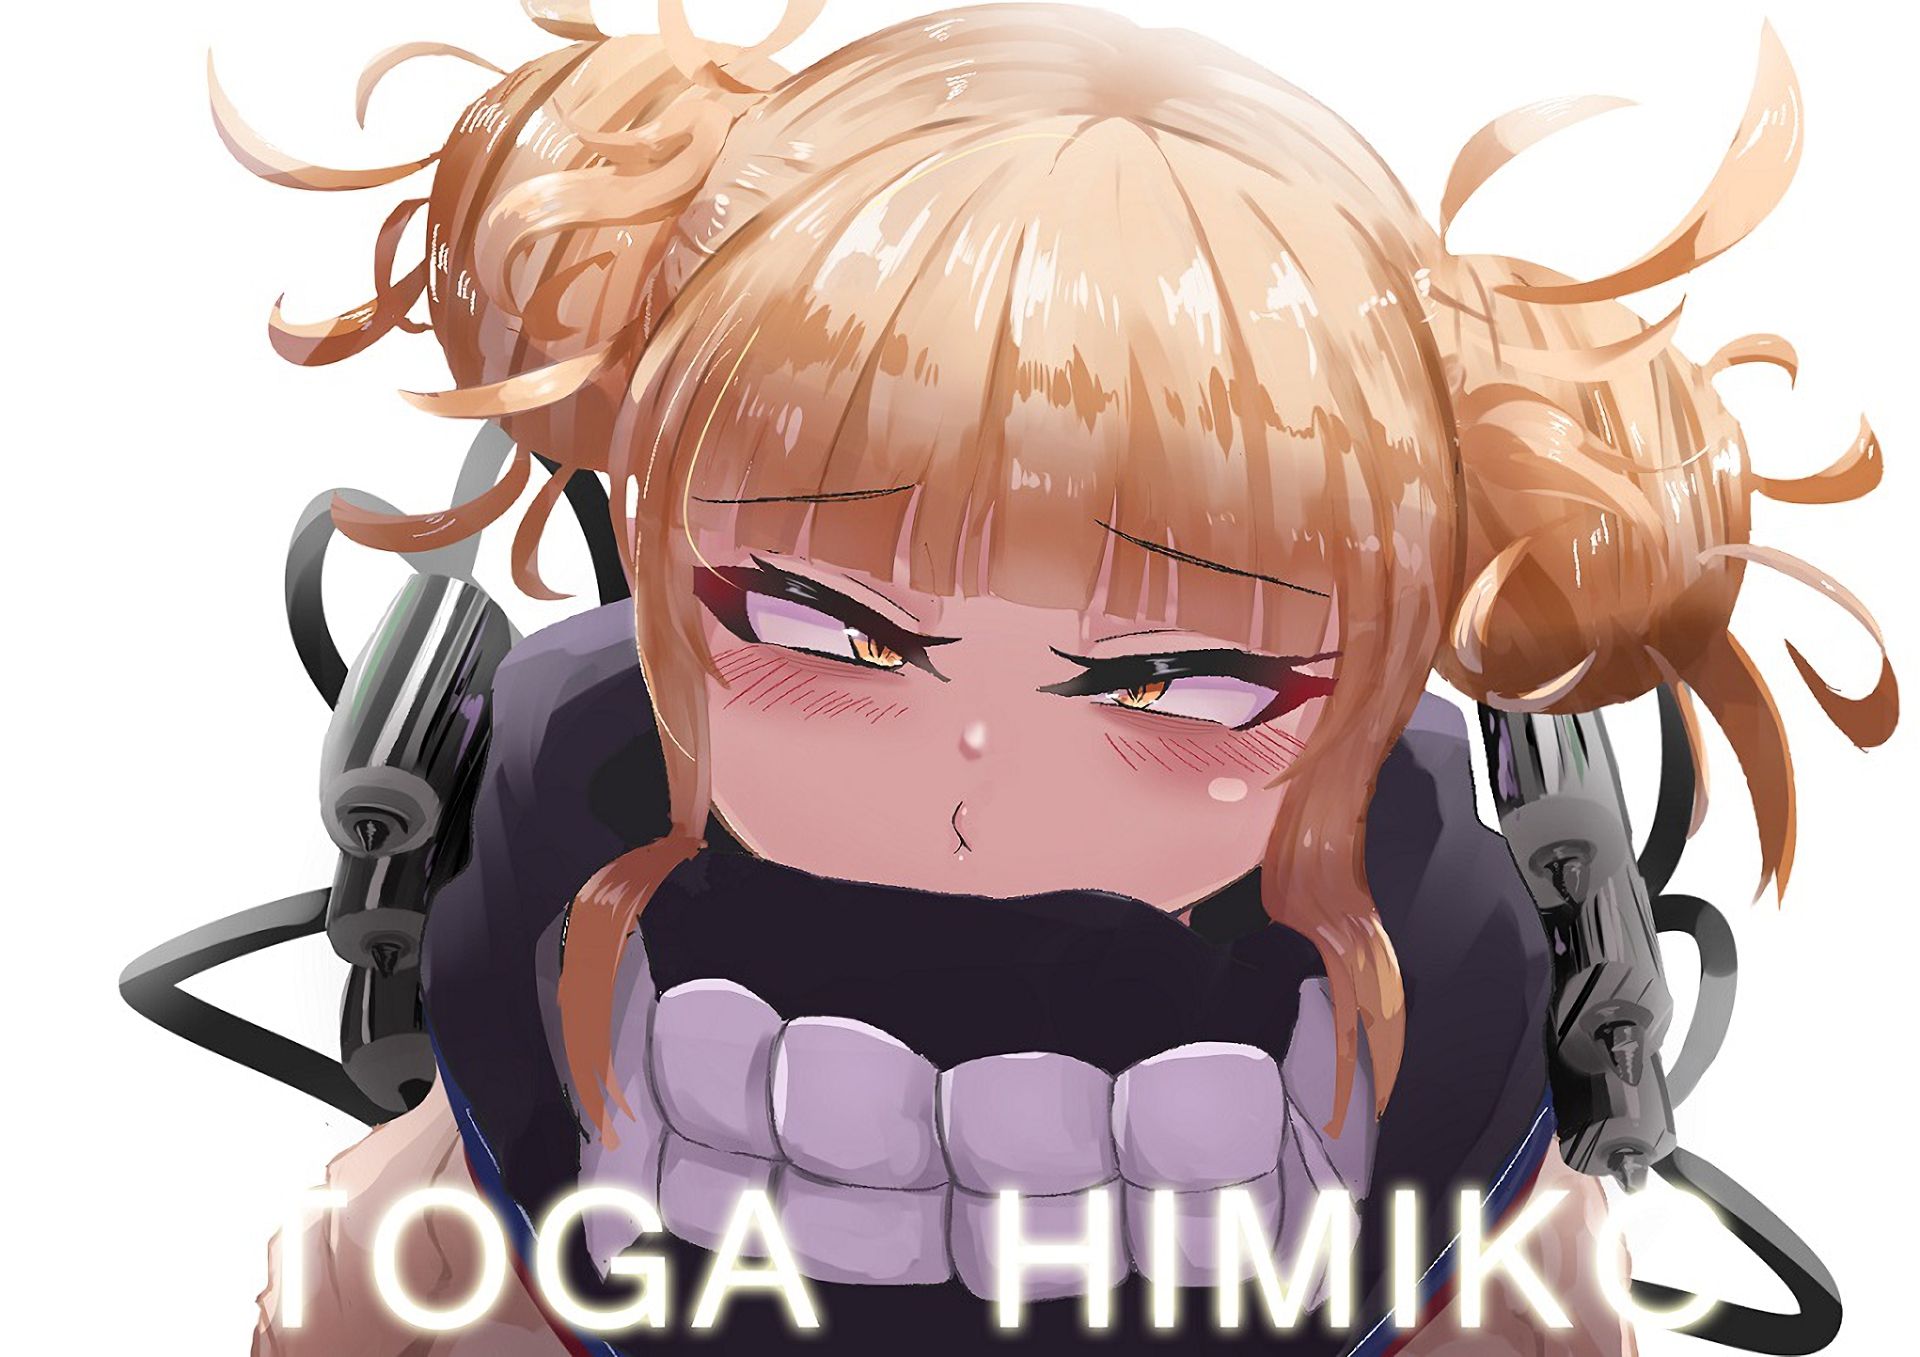 Download wallpaper from anime My Hero Academia with tags: Himiko Toga, High quality